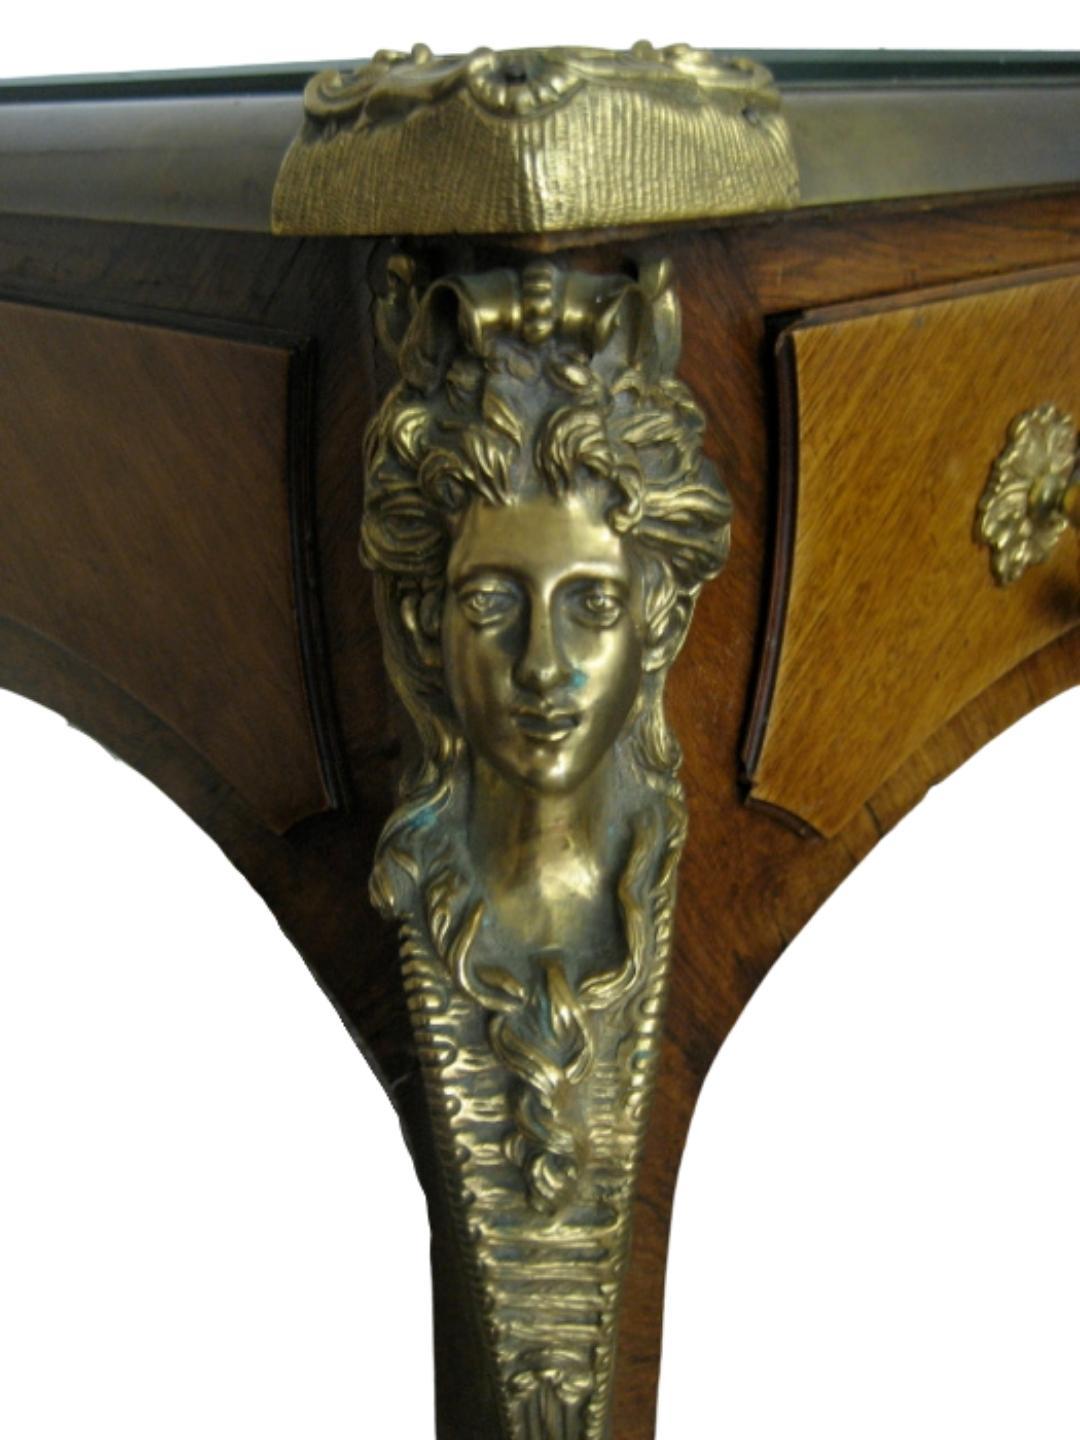 A fine Louis XV style gilt bronze-mounted minister’s desk in rosewood marquetry
Tray covered with green moleskin writing surface with gold edging and a glass initialled at the 4 corners
Three drawers
Raised on mask headed cabriole legs
Height